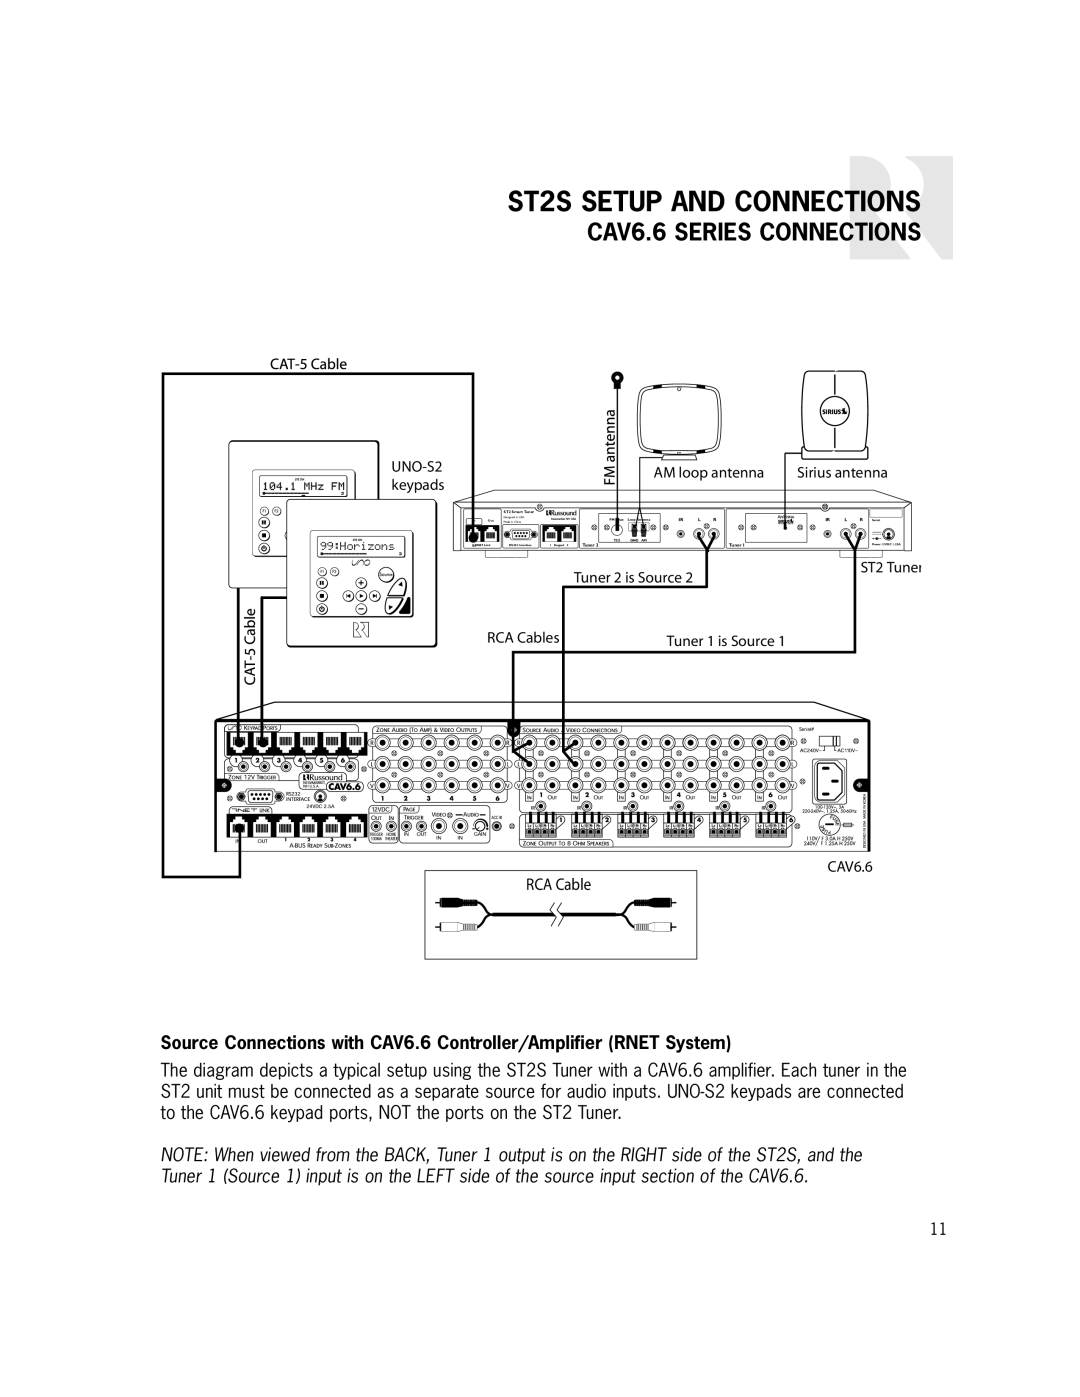 Russound installation manual CAV6.6 SERIES CONNECTIONS, ST2S SETUP AND CONNECTIONS 